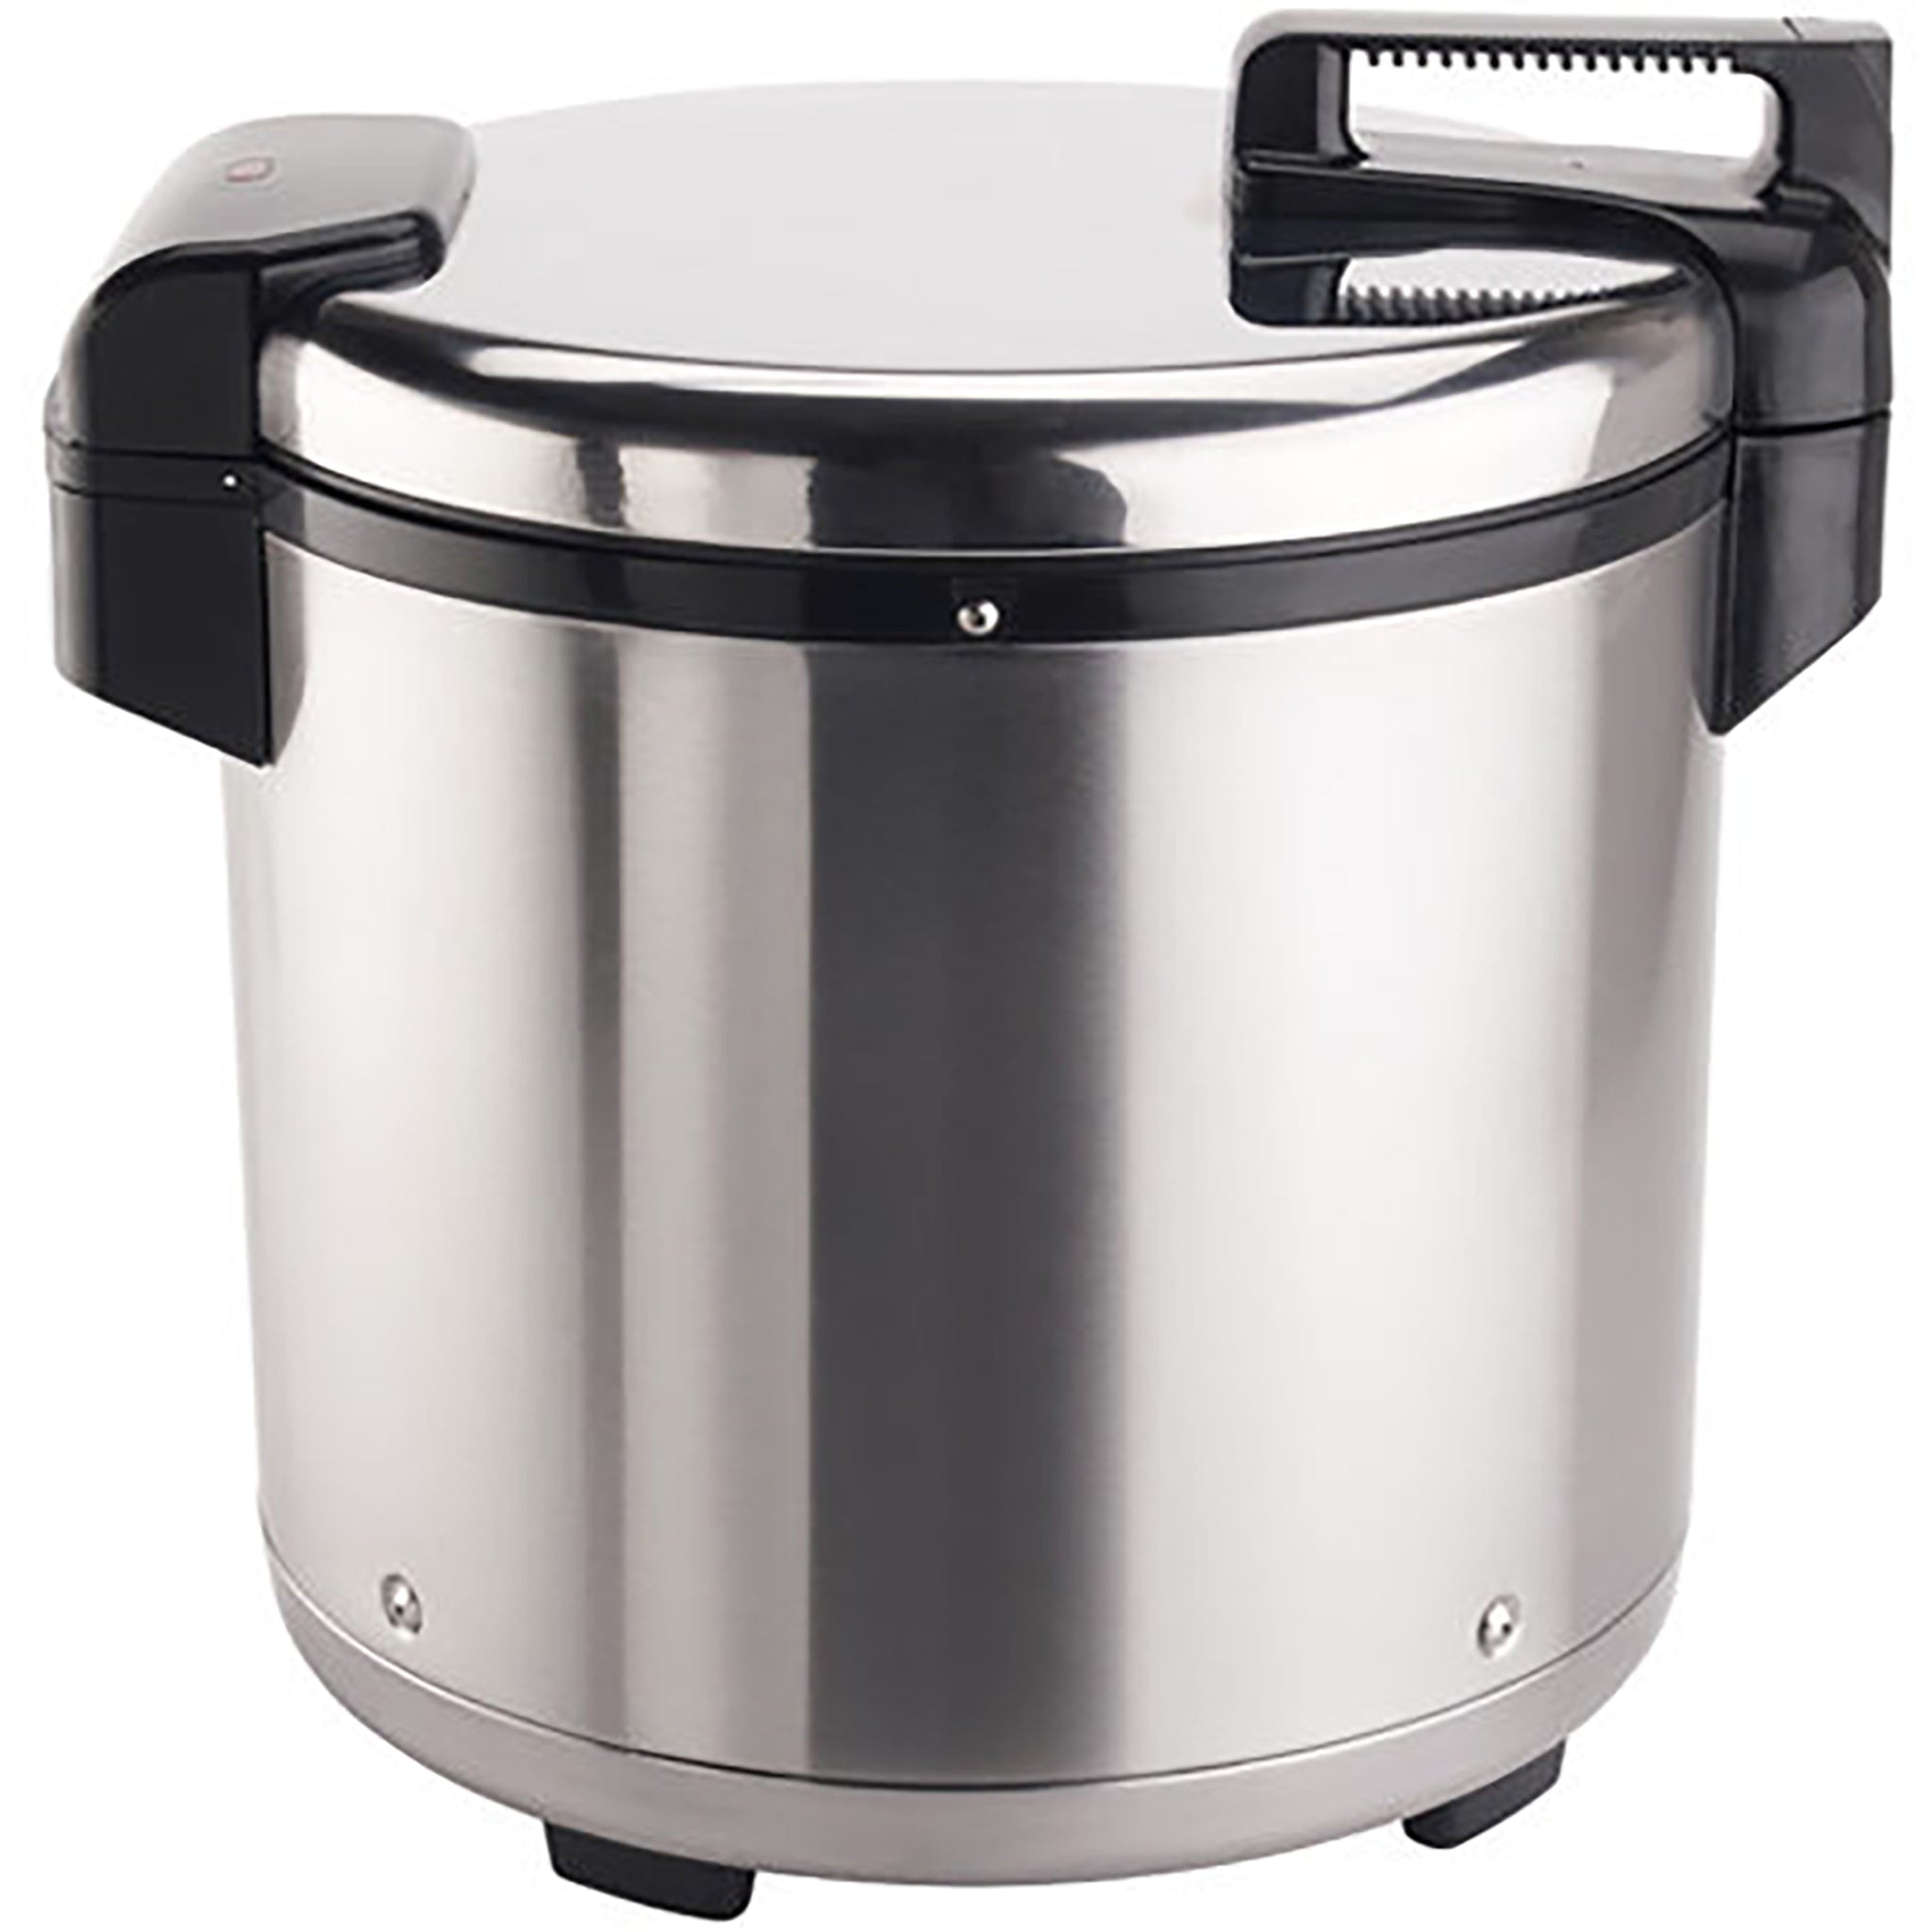 RW Clean Stainless Steel Mini Trash Can - Countertop - 4 3/4 x 4